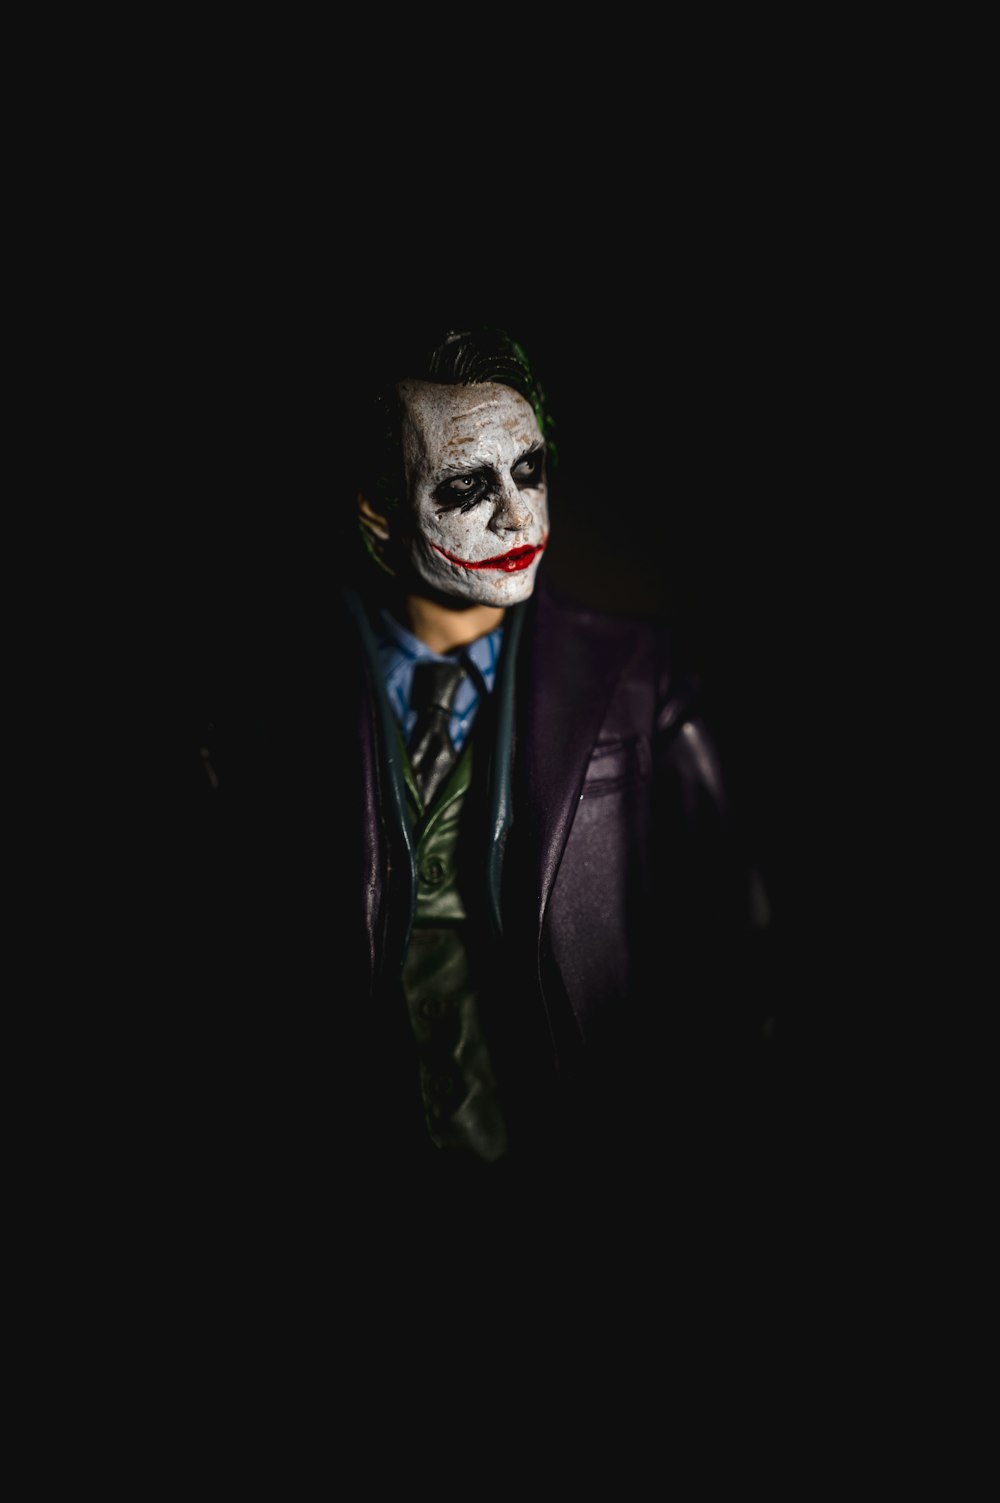 Incredible Compilation of Top 999+ Joker Face Images in Stunning 4K Quality